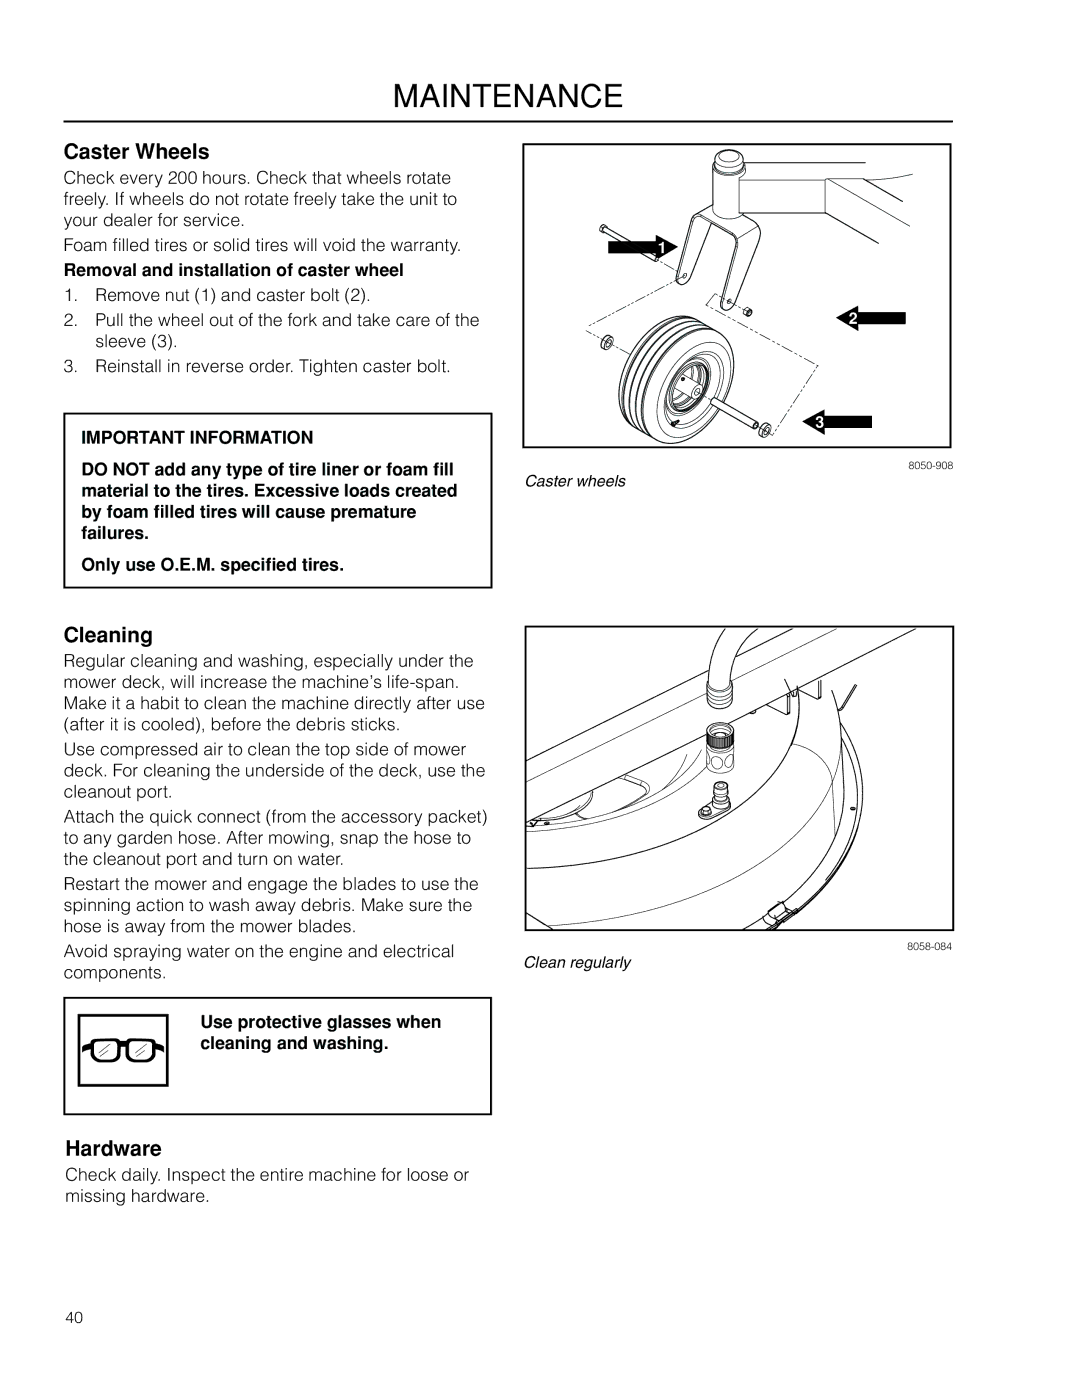 Poulan 301ZX warranty Caster Wheels, Cleaning, Hardware, Removal and installation of caster wheel 